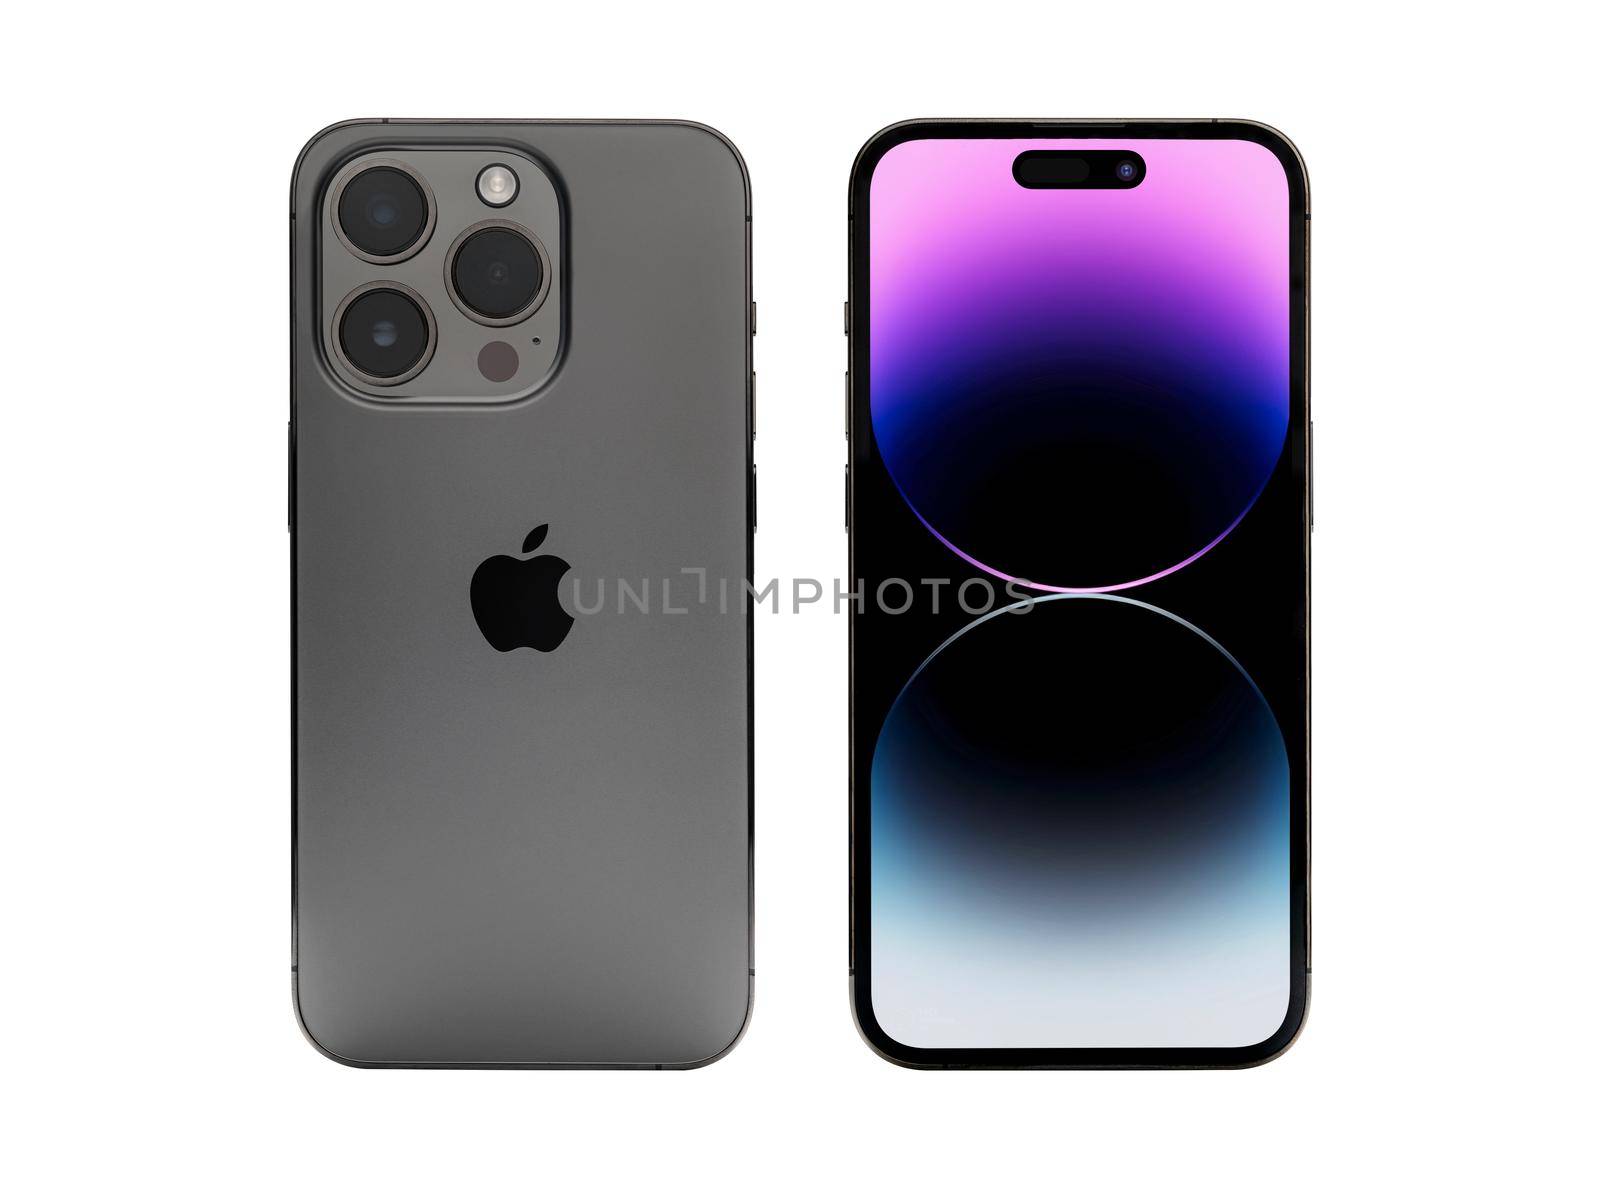 Antalya, Turkey - September 08, 2022: Newly released iphone 14 pro mockup set with back and front angles by Sonat